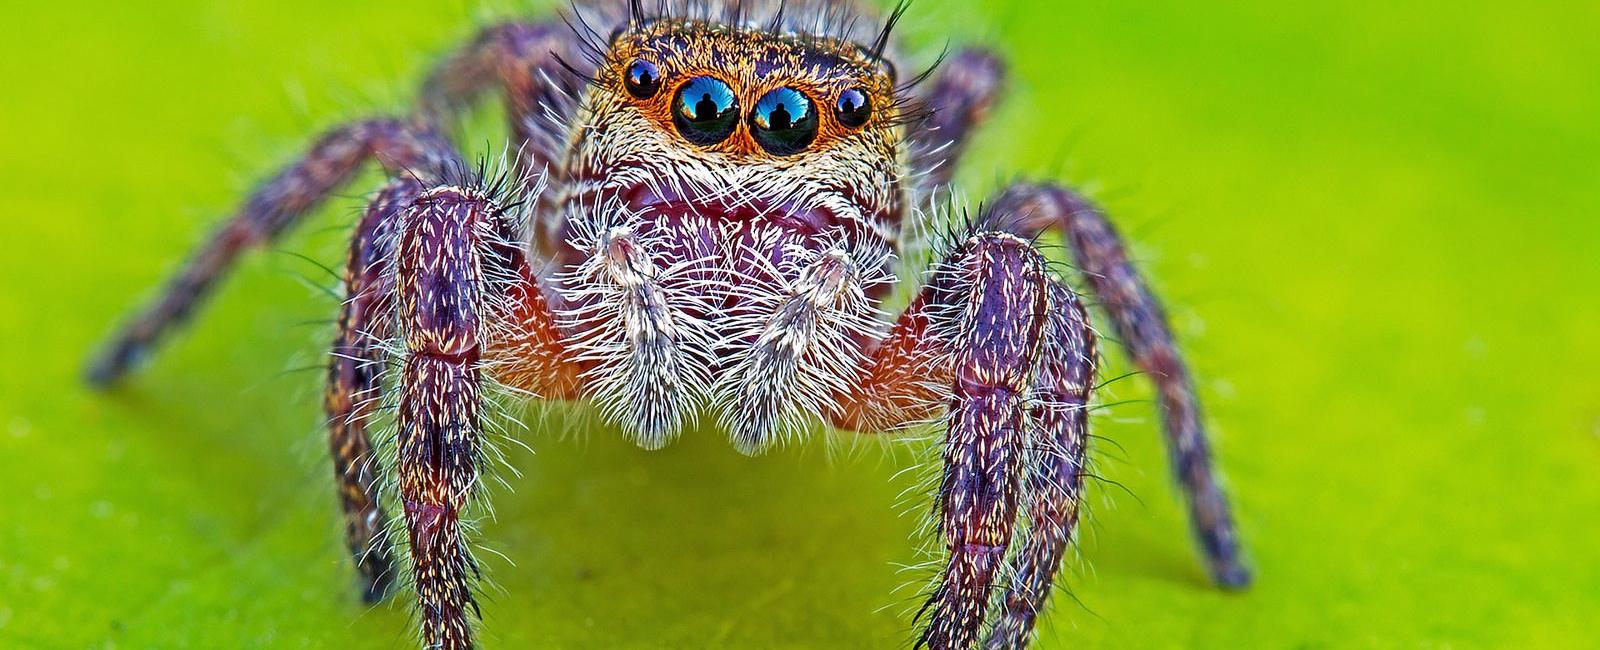 Spiders could theoretically eat every human being on the planet and still be very hungry